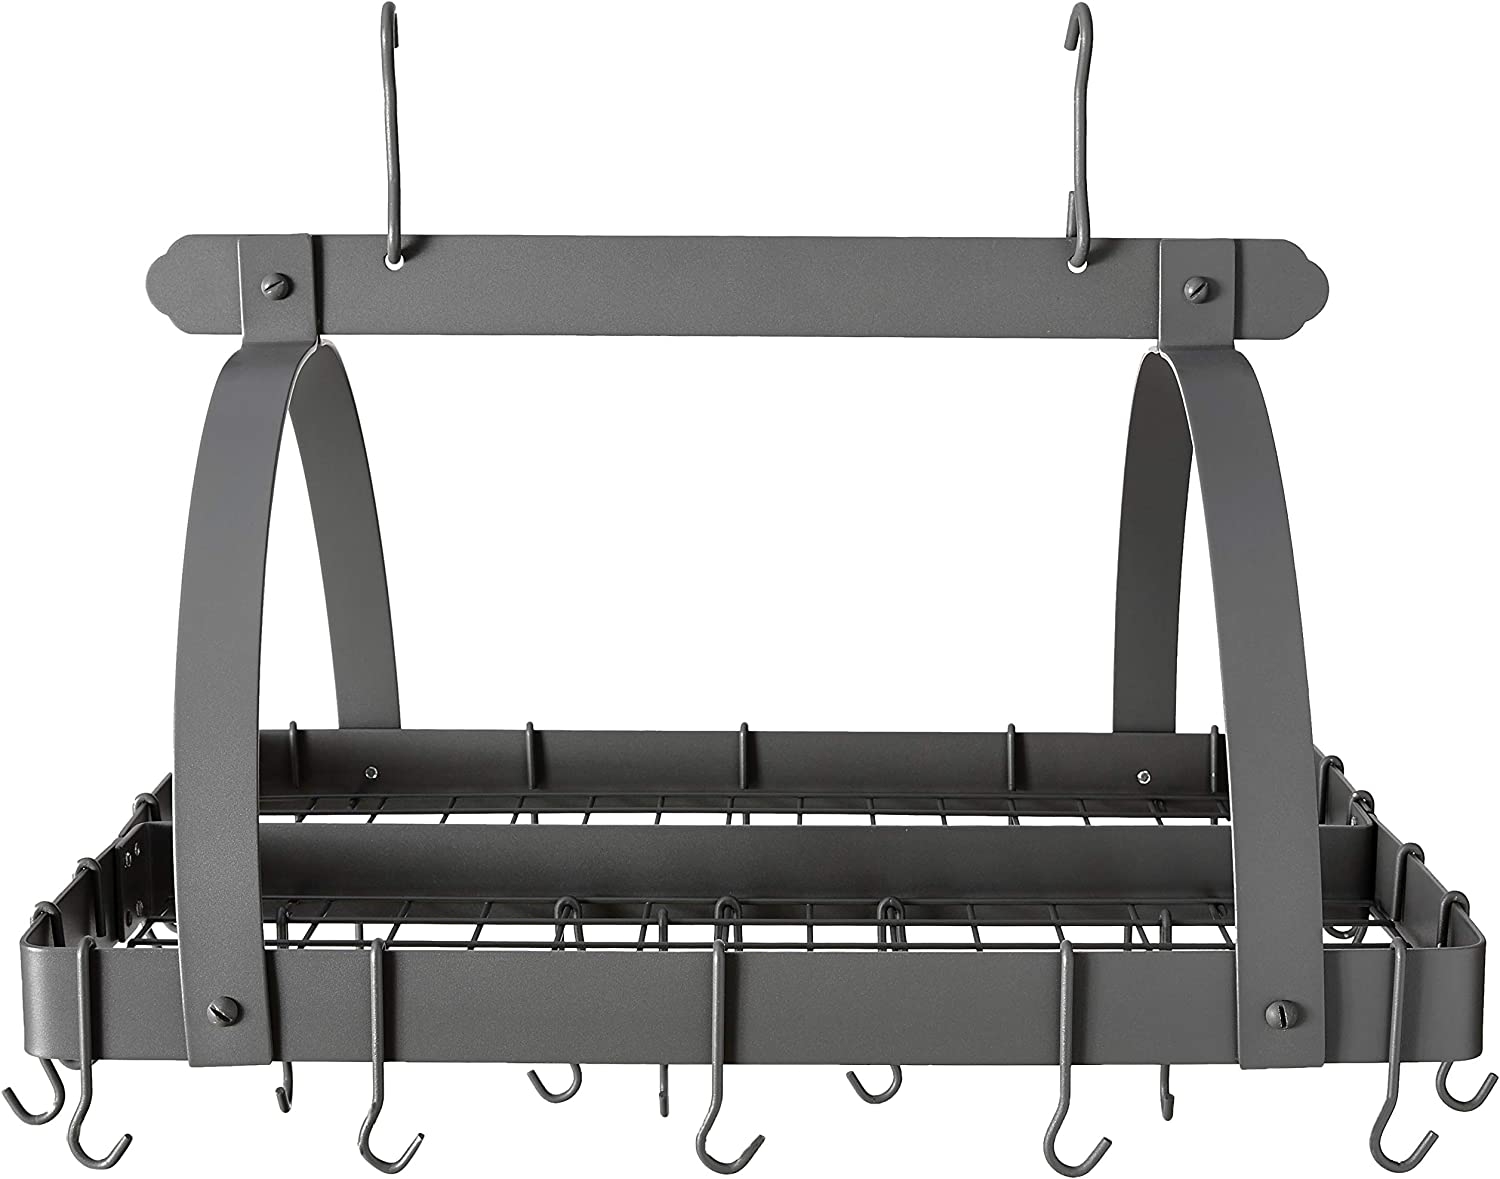 Old Dutch Rectangular Hanging Pot Rack with Grid & 24 Hooks, Oiled Bronze, 30″ x 20.5″ x 15.75″ Import To Shop ×Product